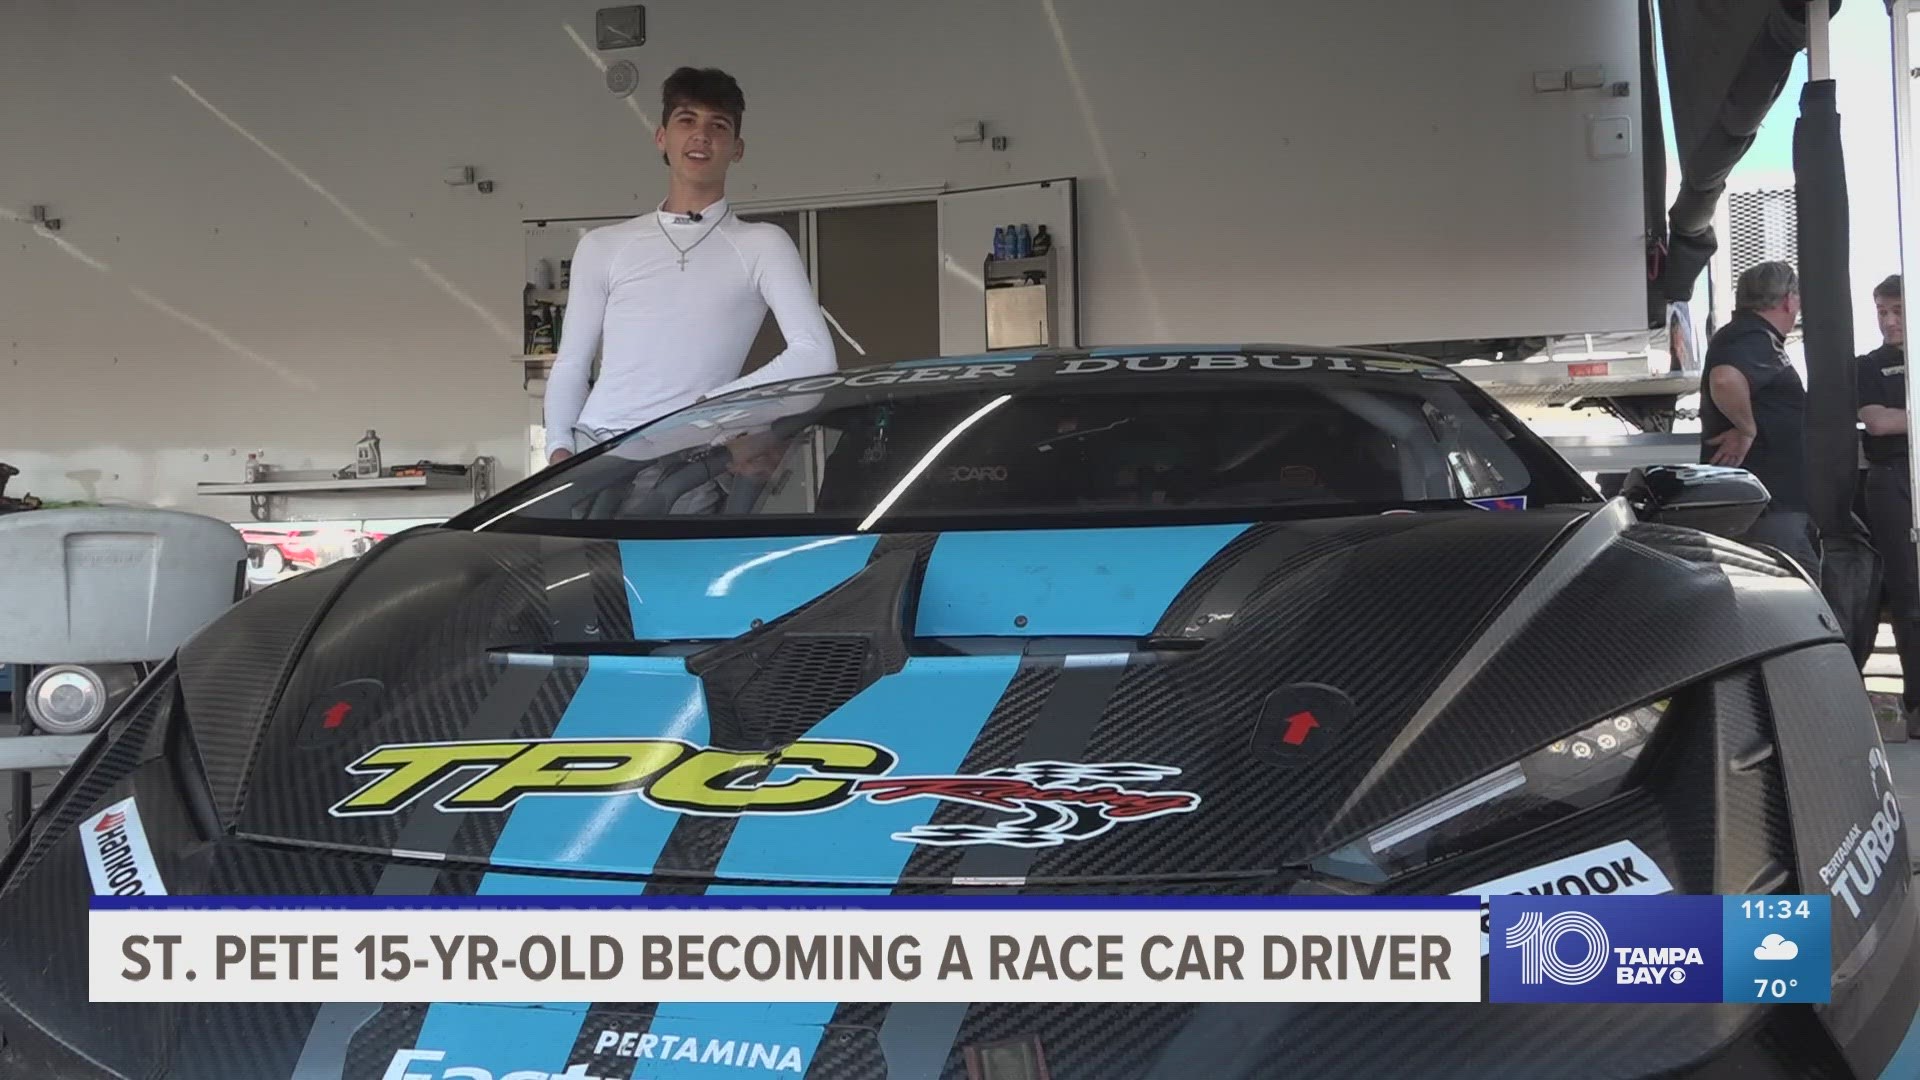 Alex Bowen is only 15 but is being recruited by Lamborghini to race in its Super Trofeo international racing series.